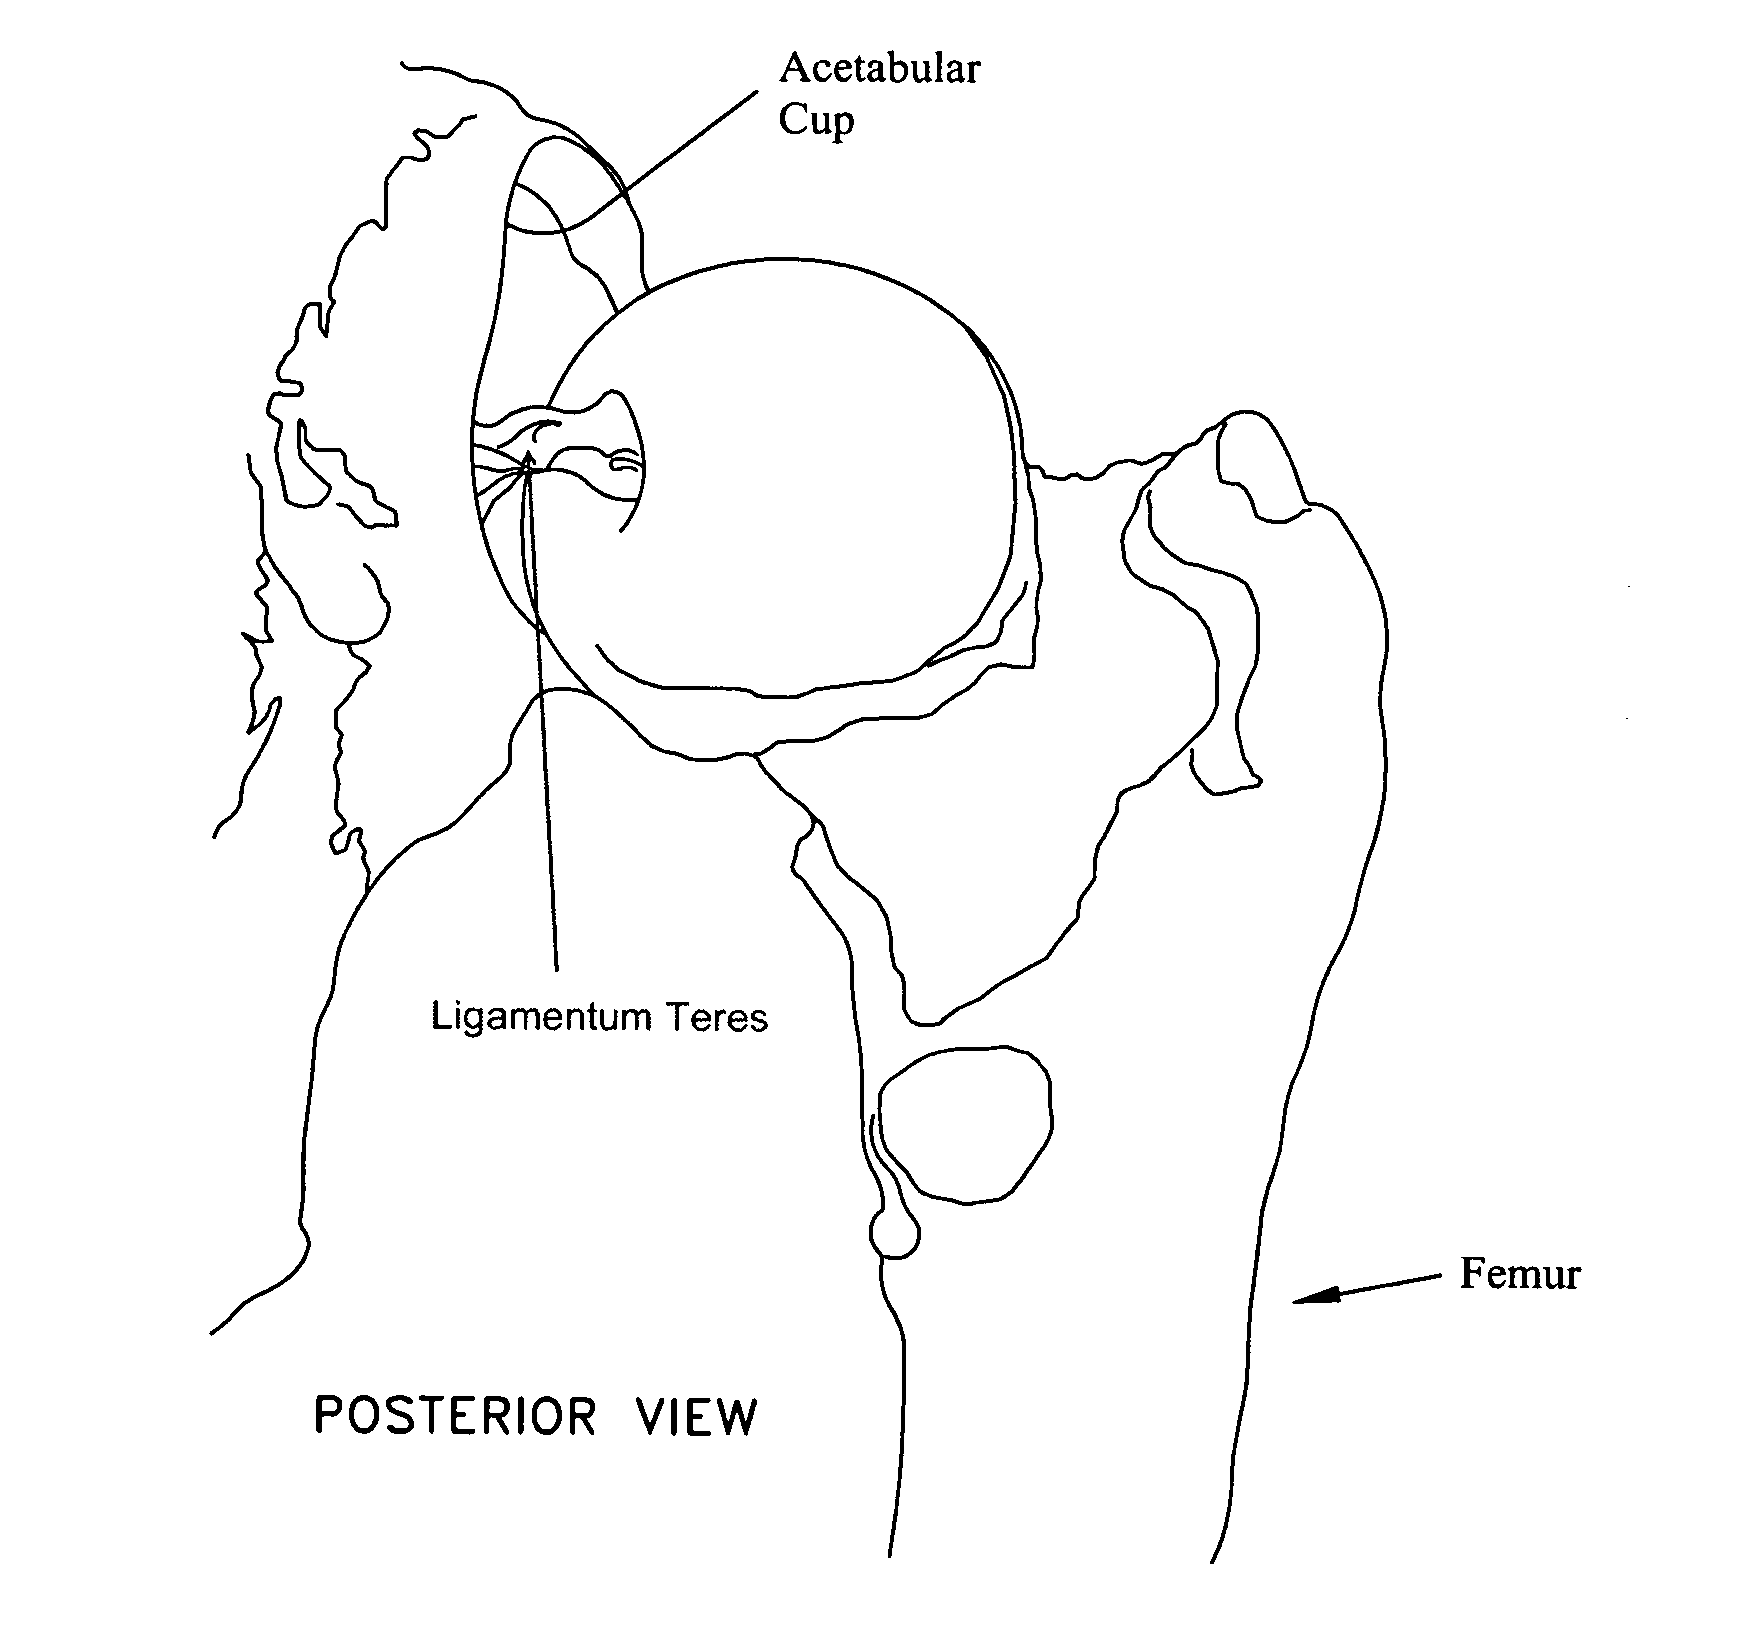 Method and apparatus for re-attaching the labrum of a hip joint